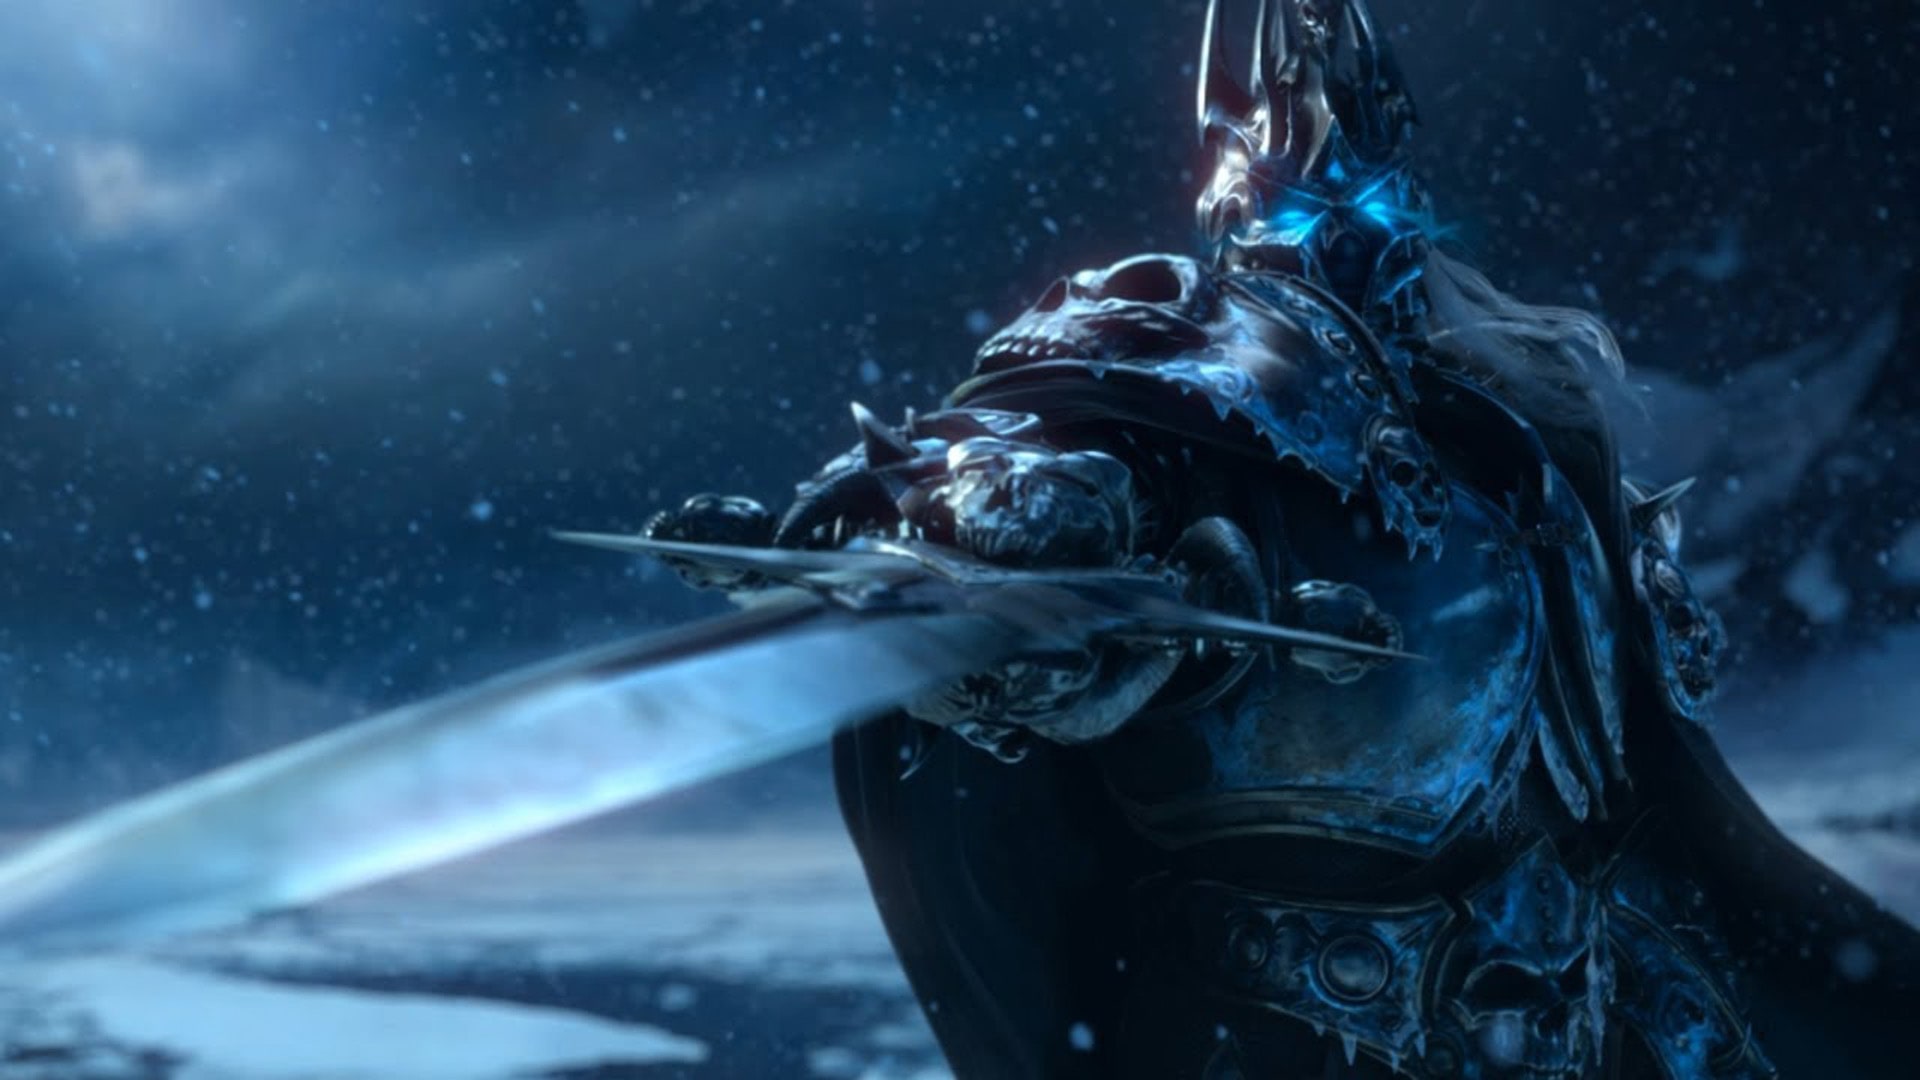 Arthas Menethil - The Lich King from World of Warcraft